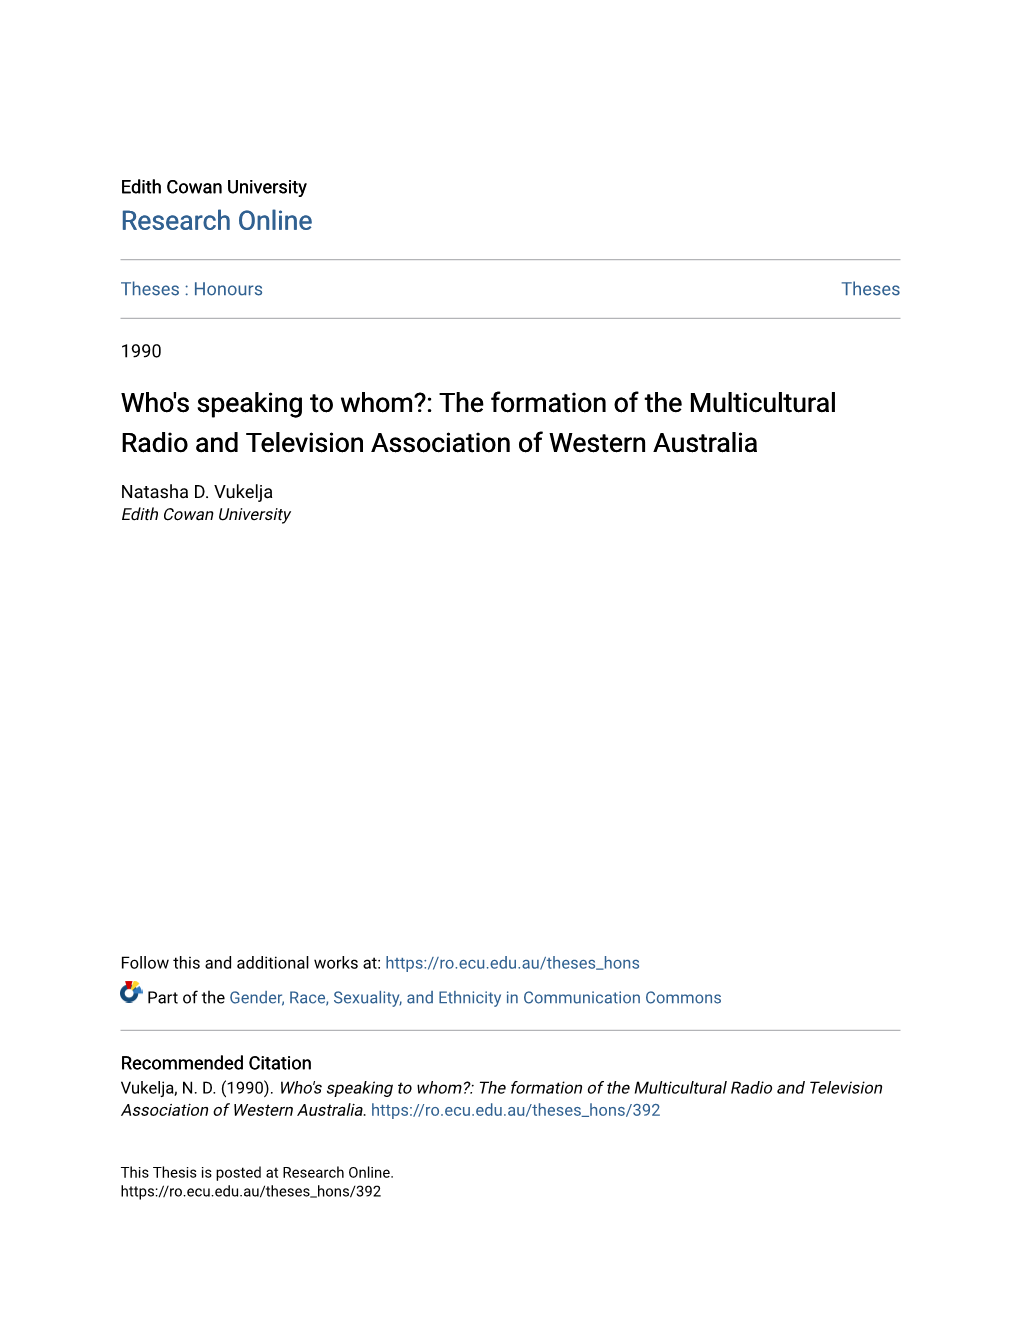 The Formation of the Multicultural Radio and Television Association of Western Australia